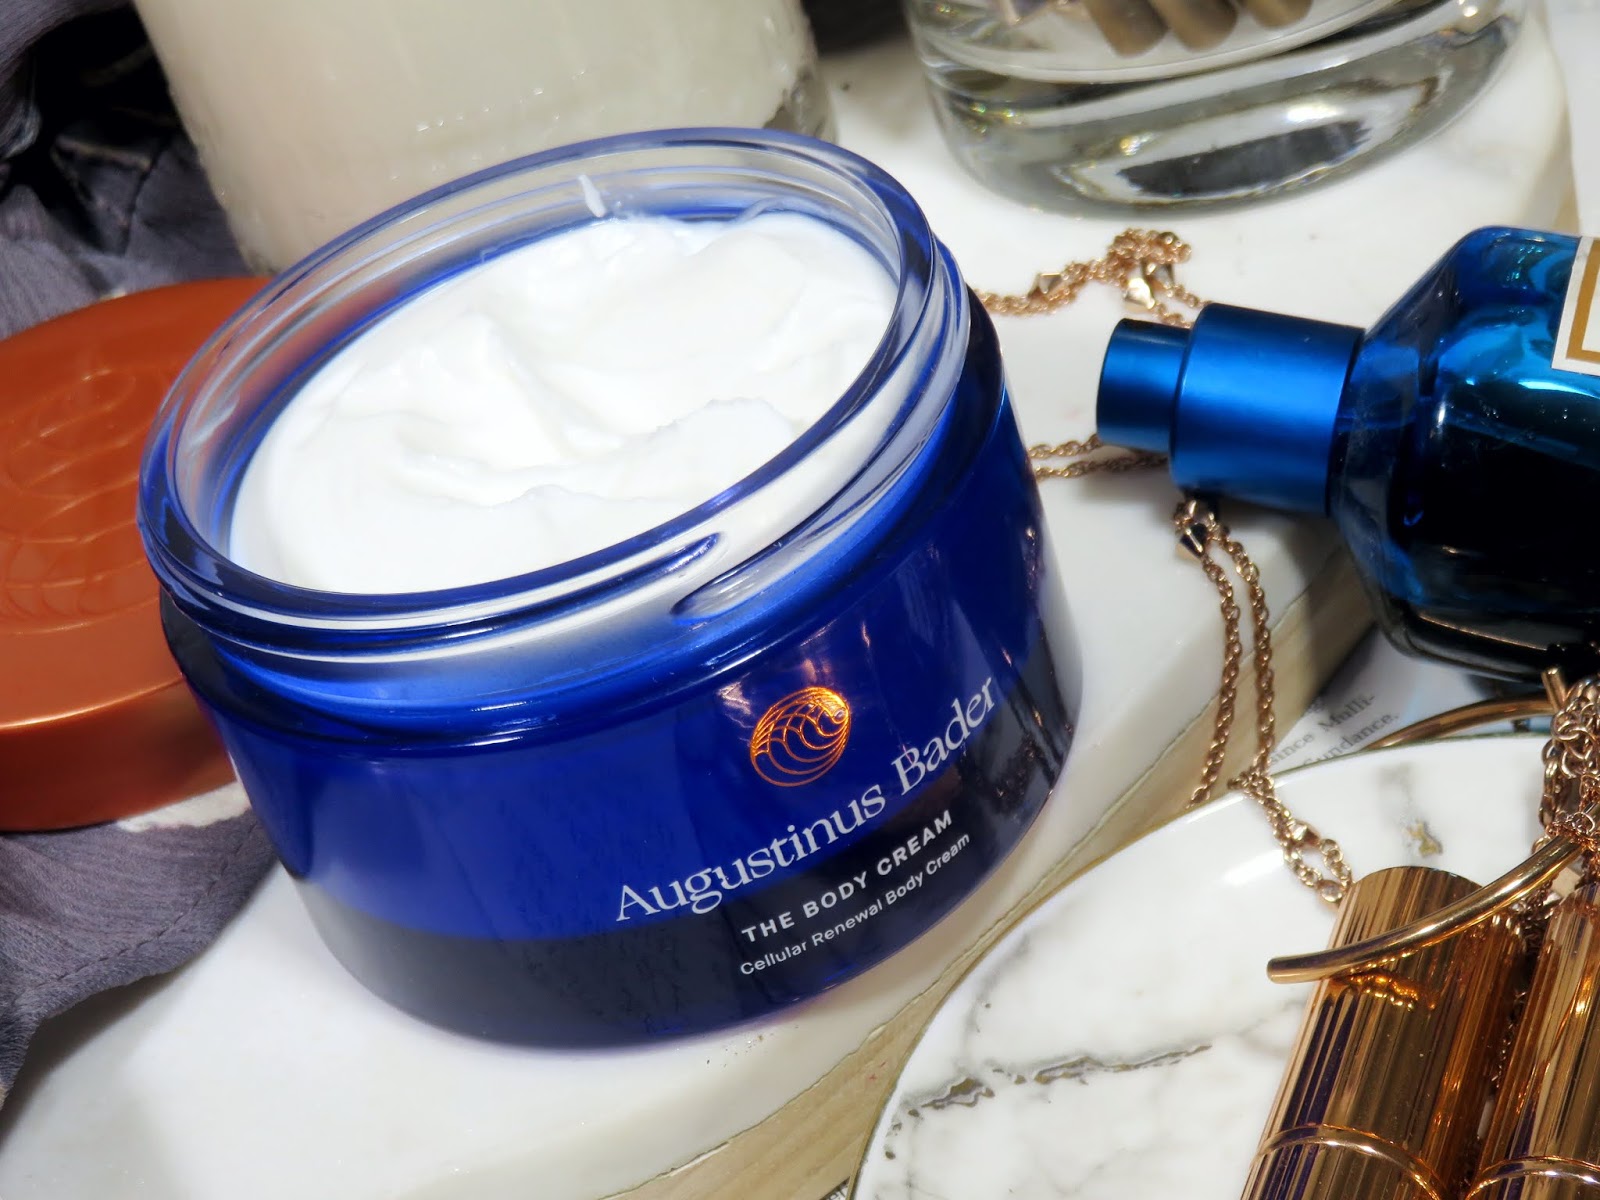 Augustinus Bader The Body Cream Review